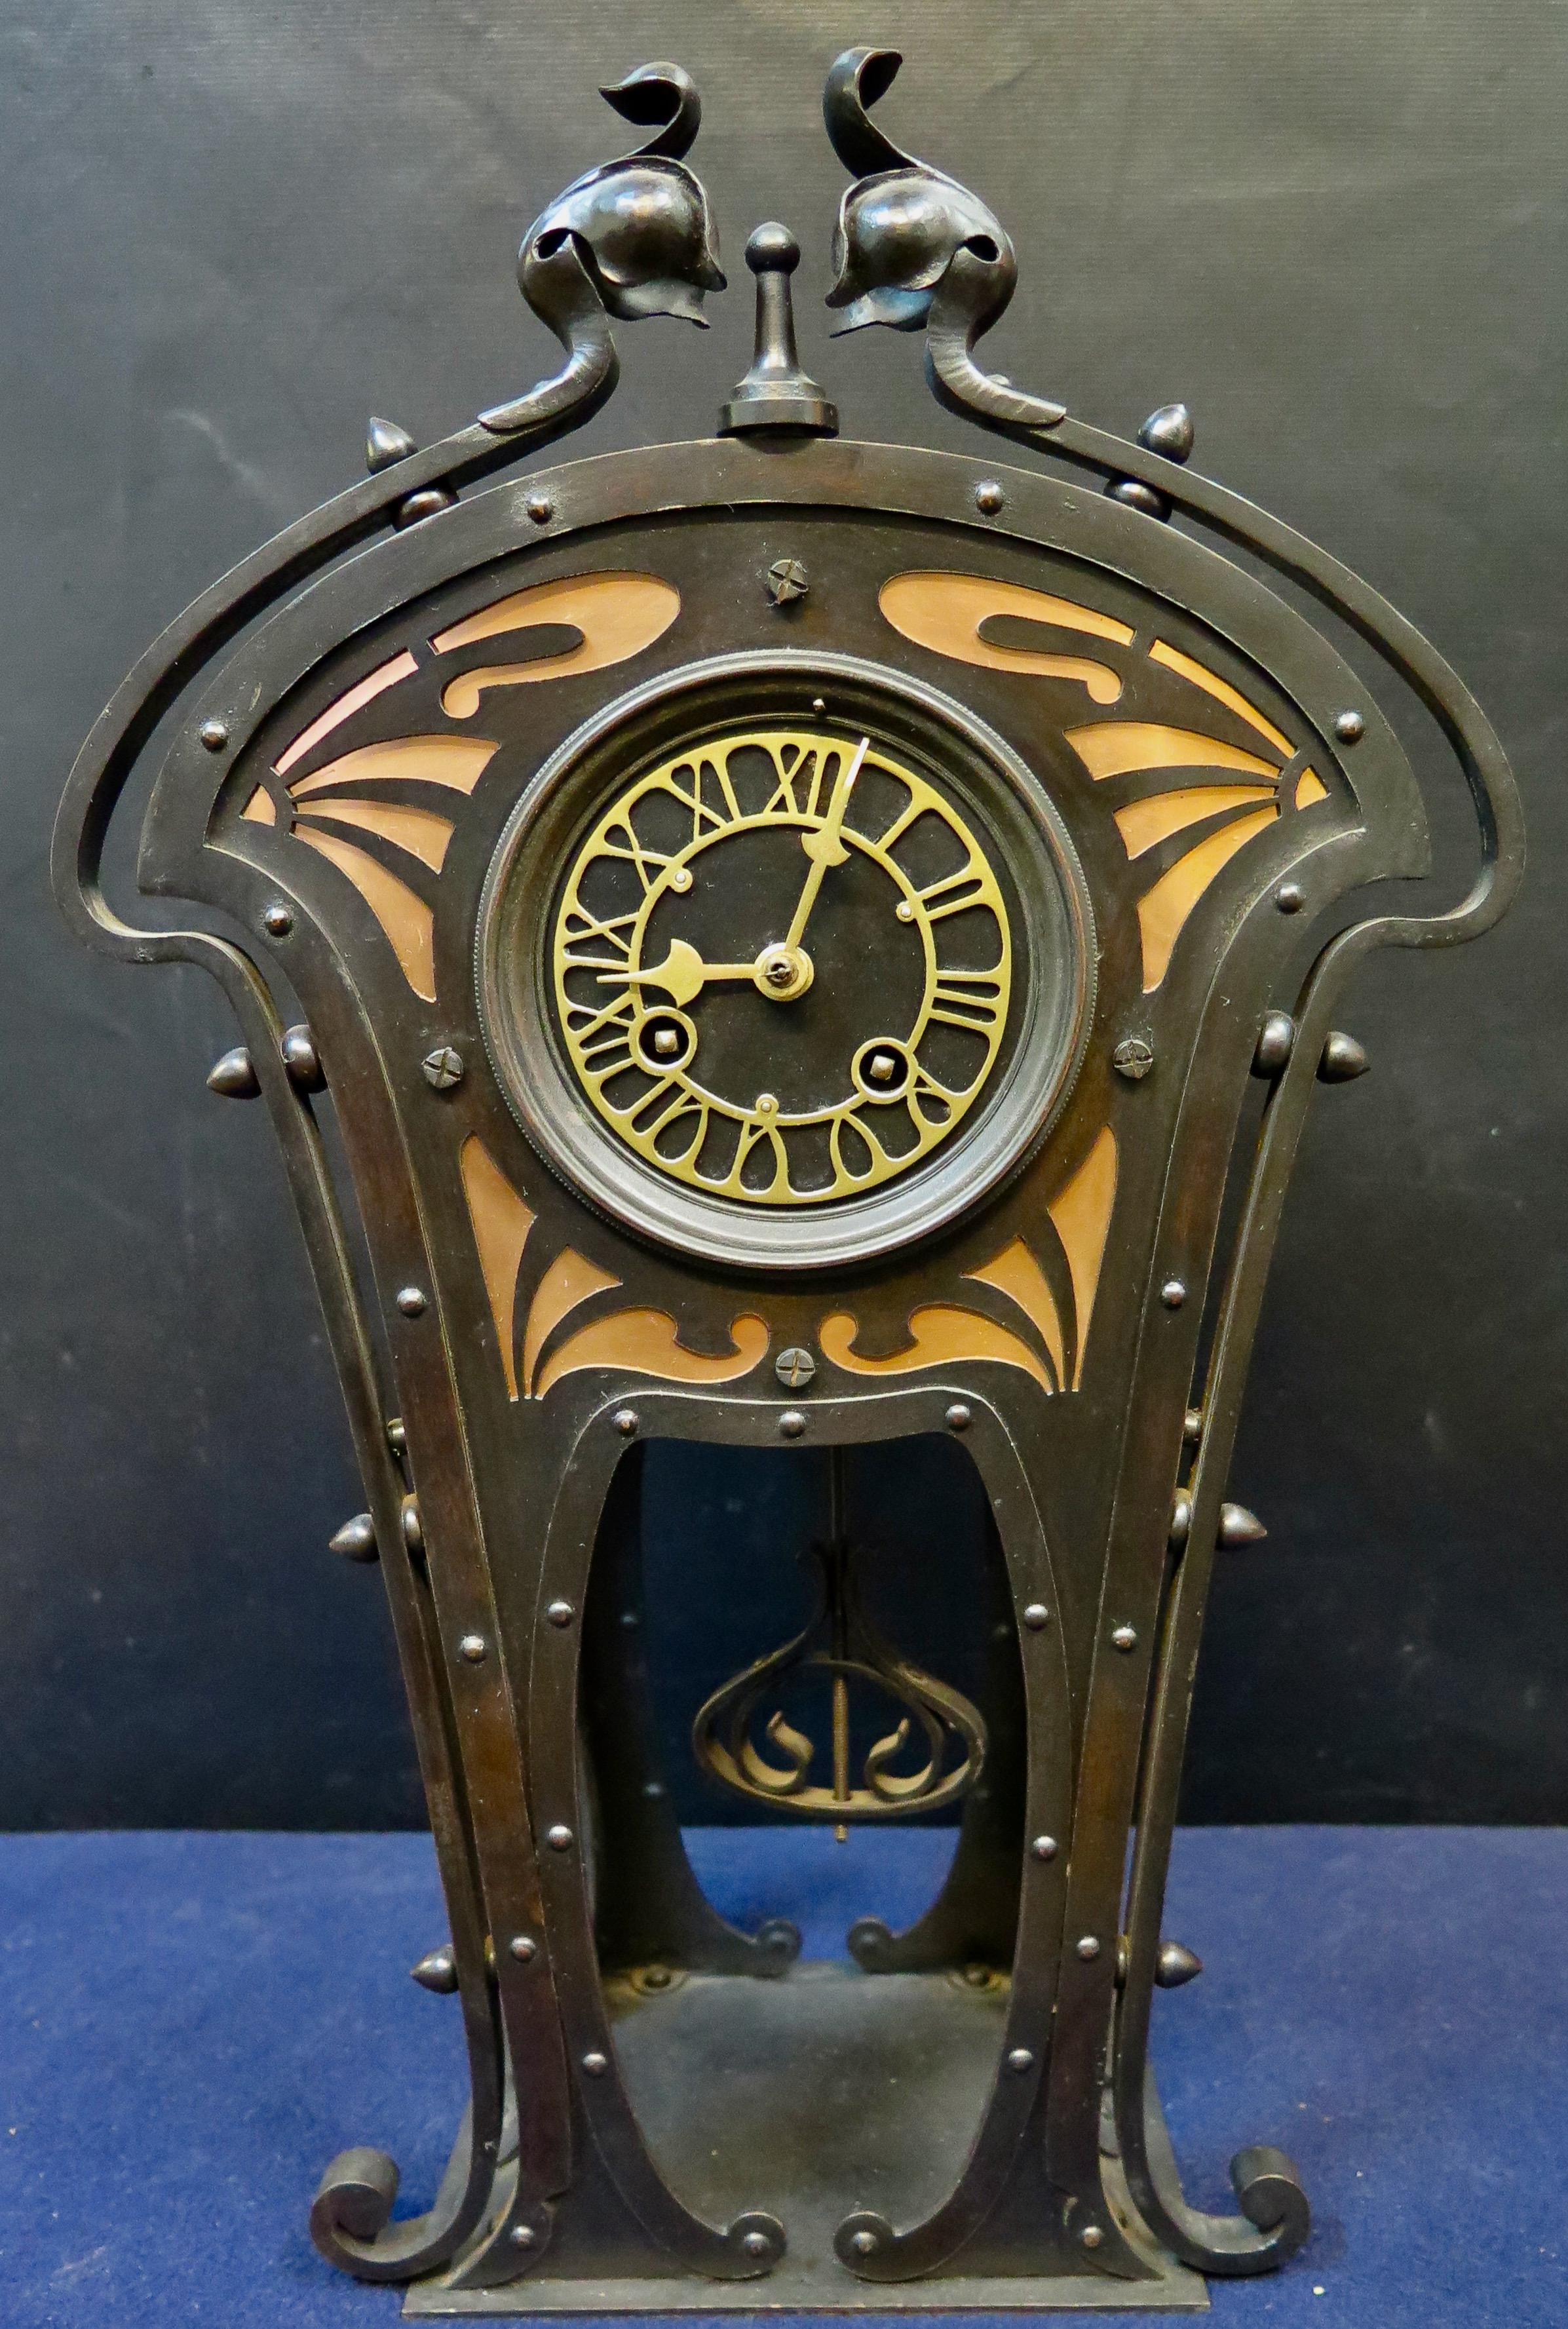 This vintage early 20th century “Arts & Crafts” three piece clock set is beautifully hand crafted with a blackened wrought iron exterior. The clock is designed with an exceptional flowing scrolled motif dominating the appearance. This motif is